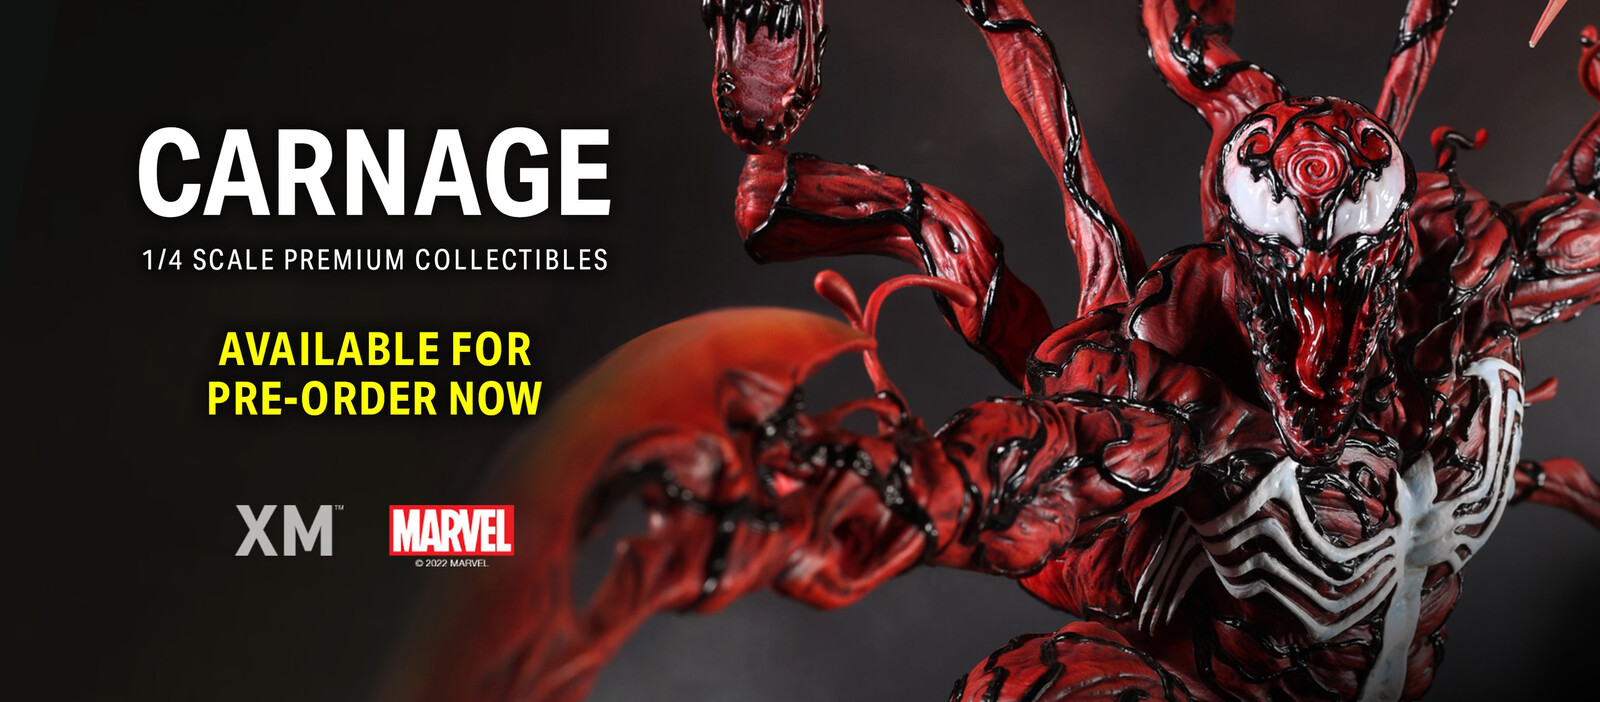 • Absolute Carnage (1:4 scale Premium Collectibles statue):
https://bit.ly/absolute-carnage